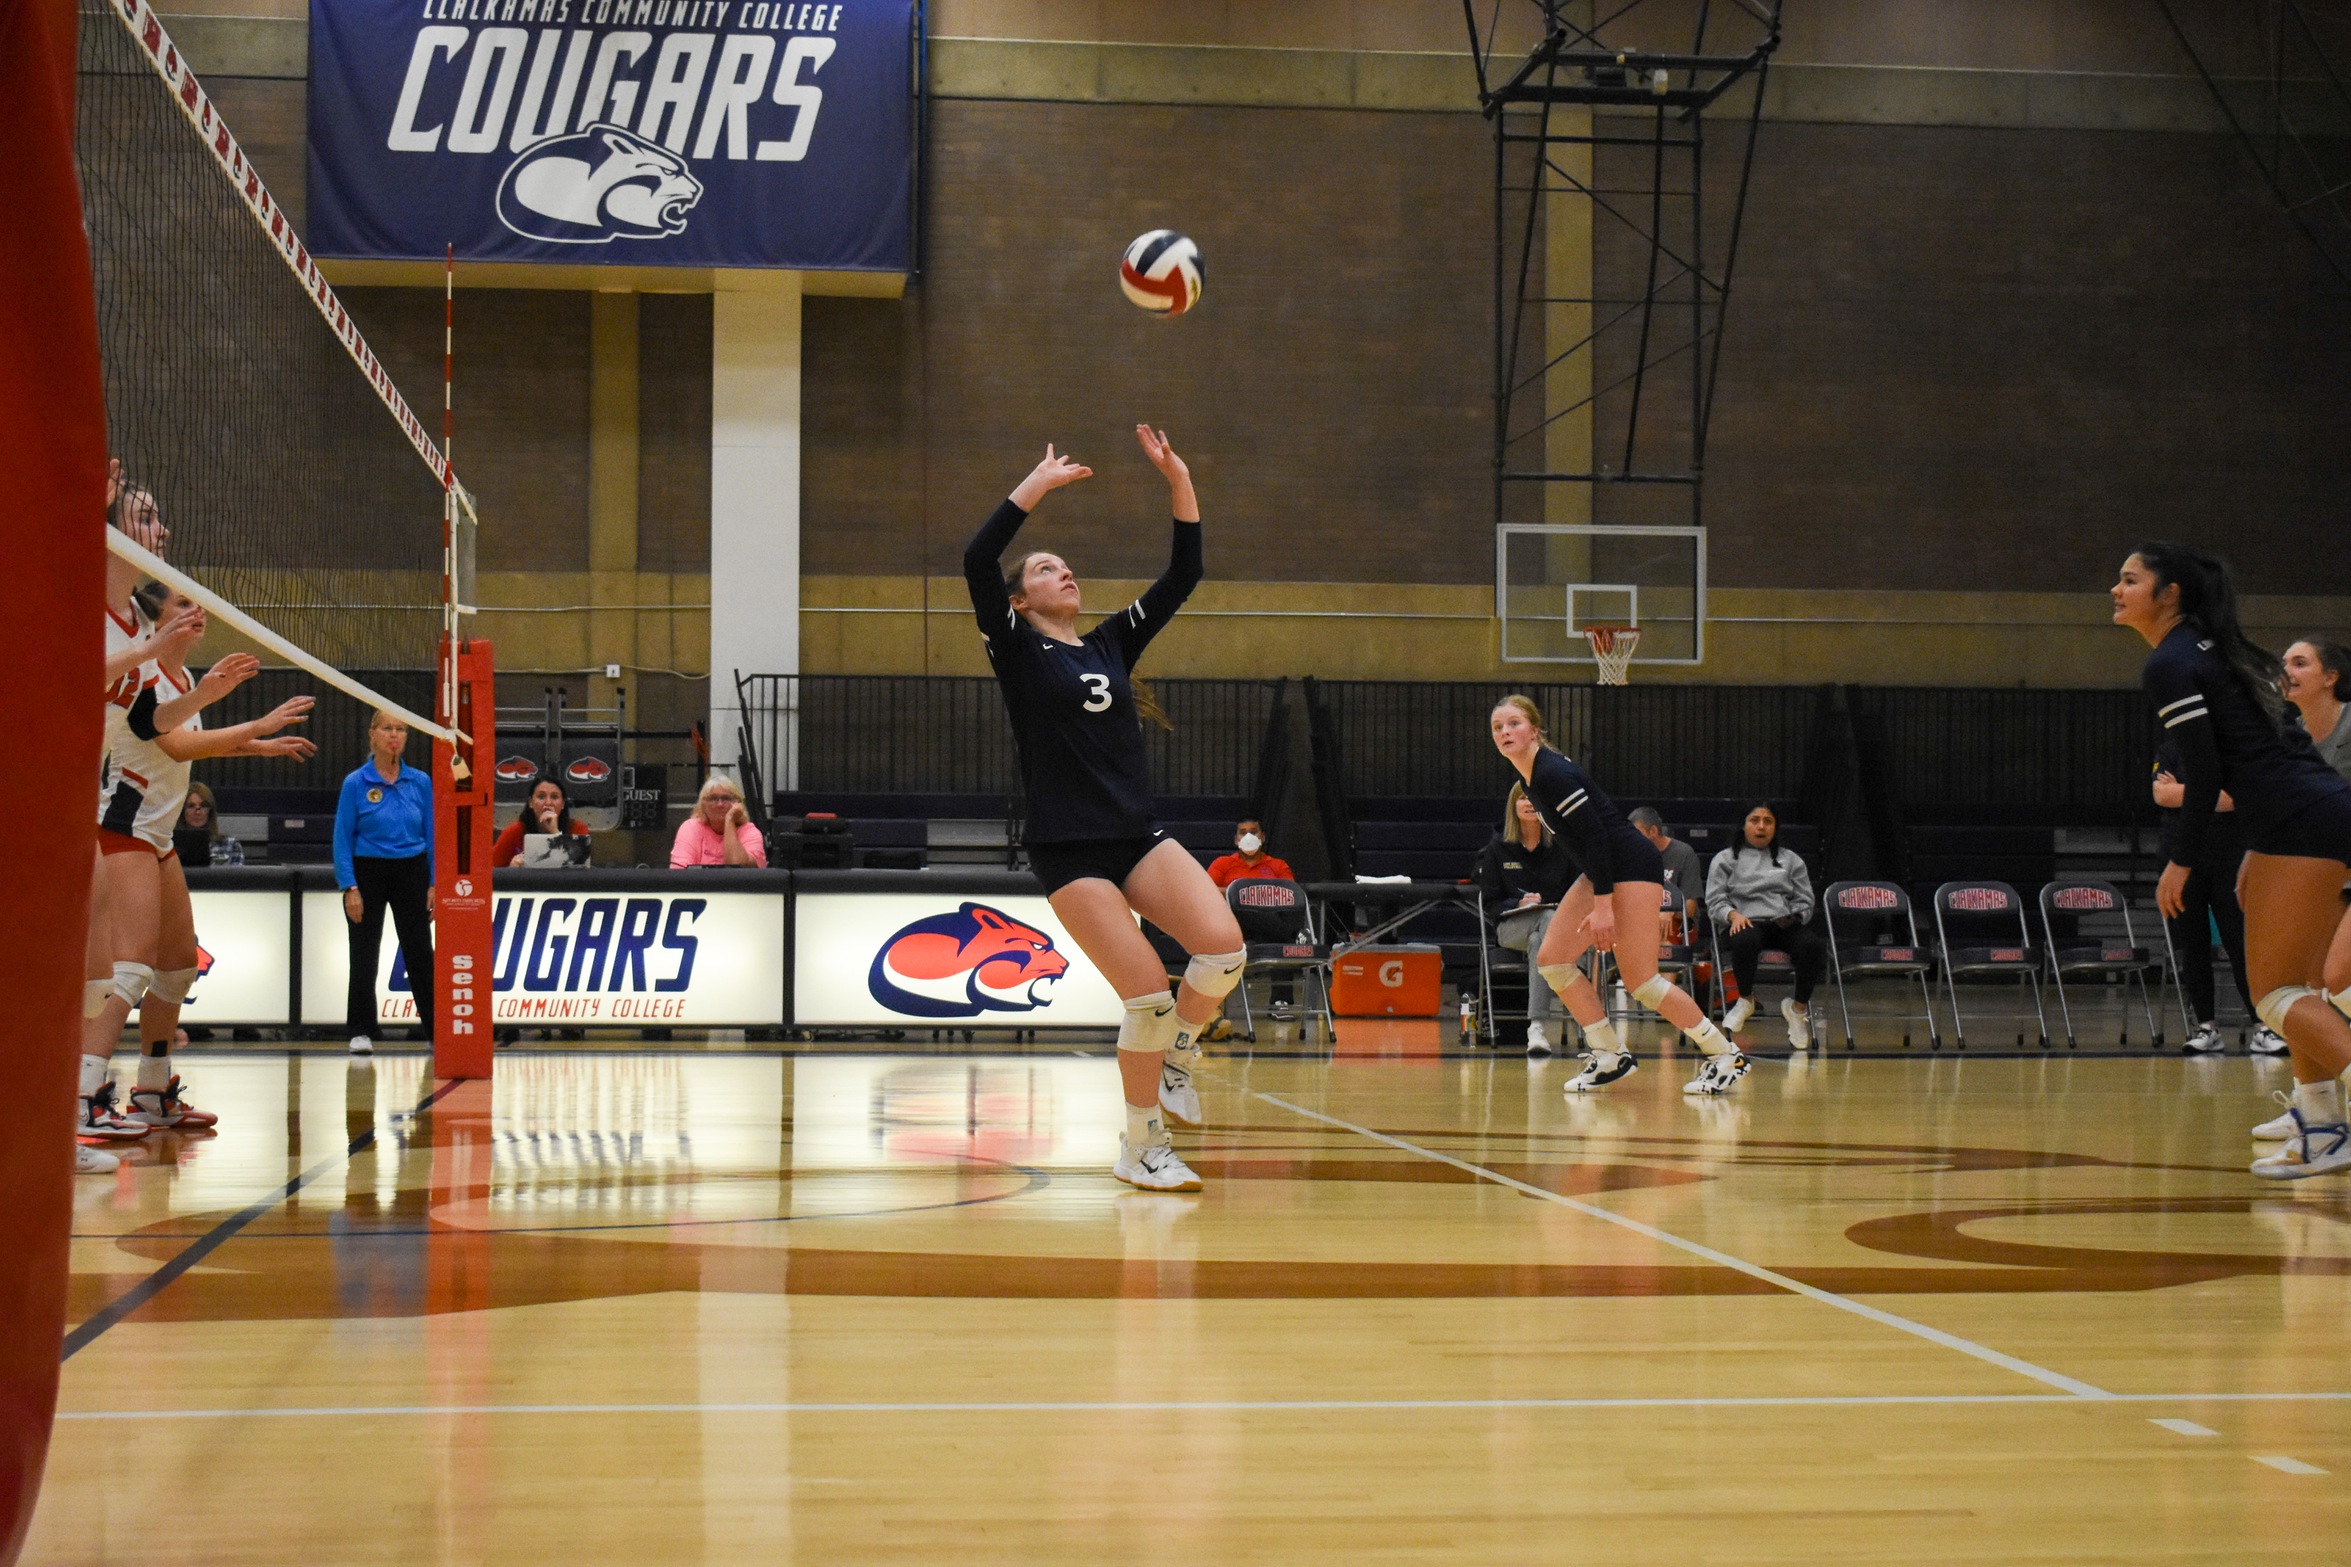 Savannah Hutchins sets the ball in a match against Clackamas Community College on Friday, Oct. 16.